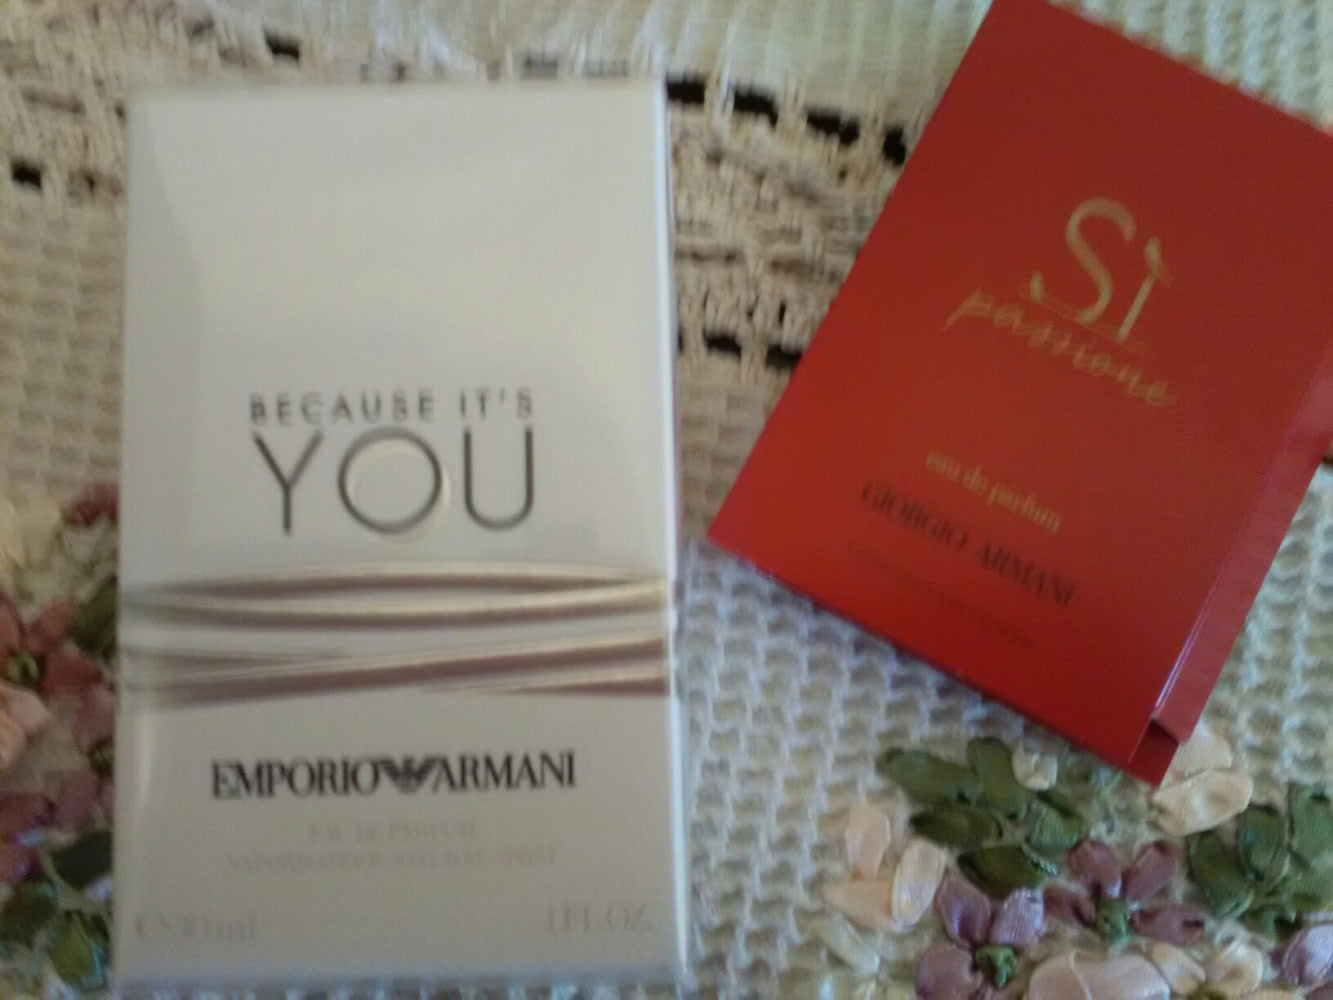 BECAUSE IT’S YOU Парфюмерная вода Giorgio Armani.